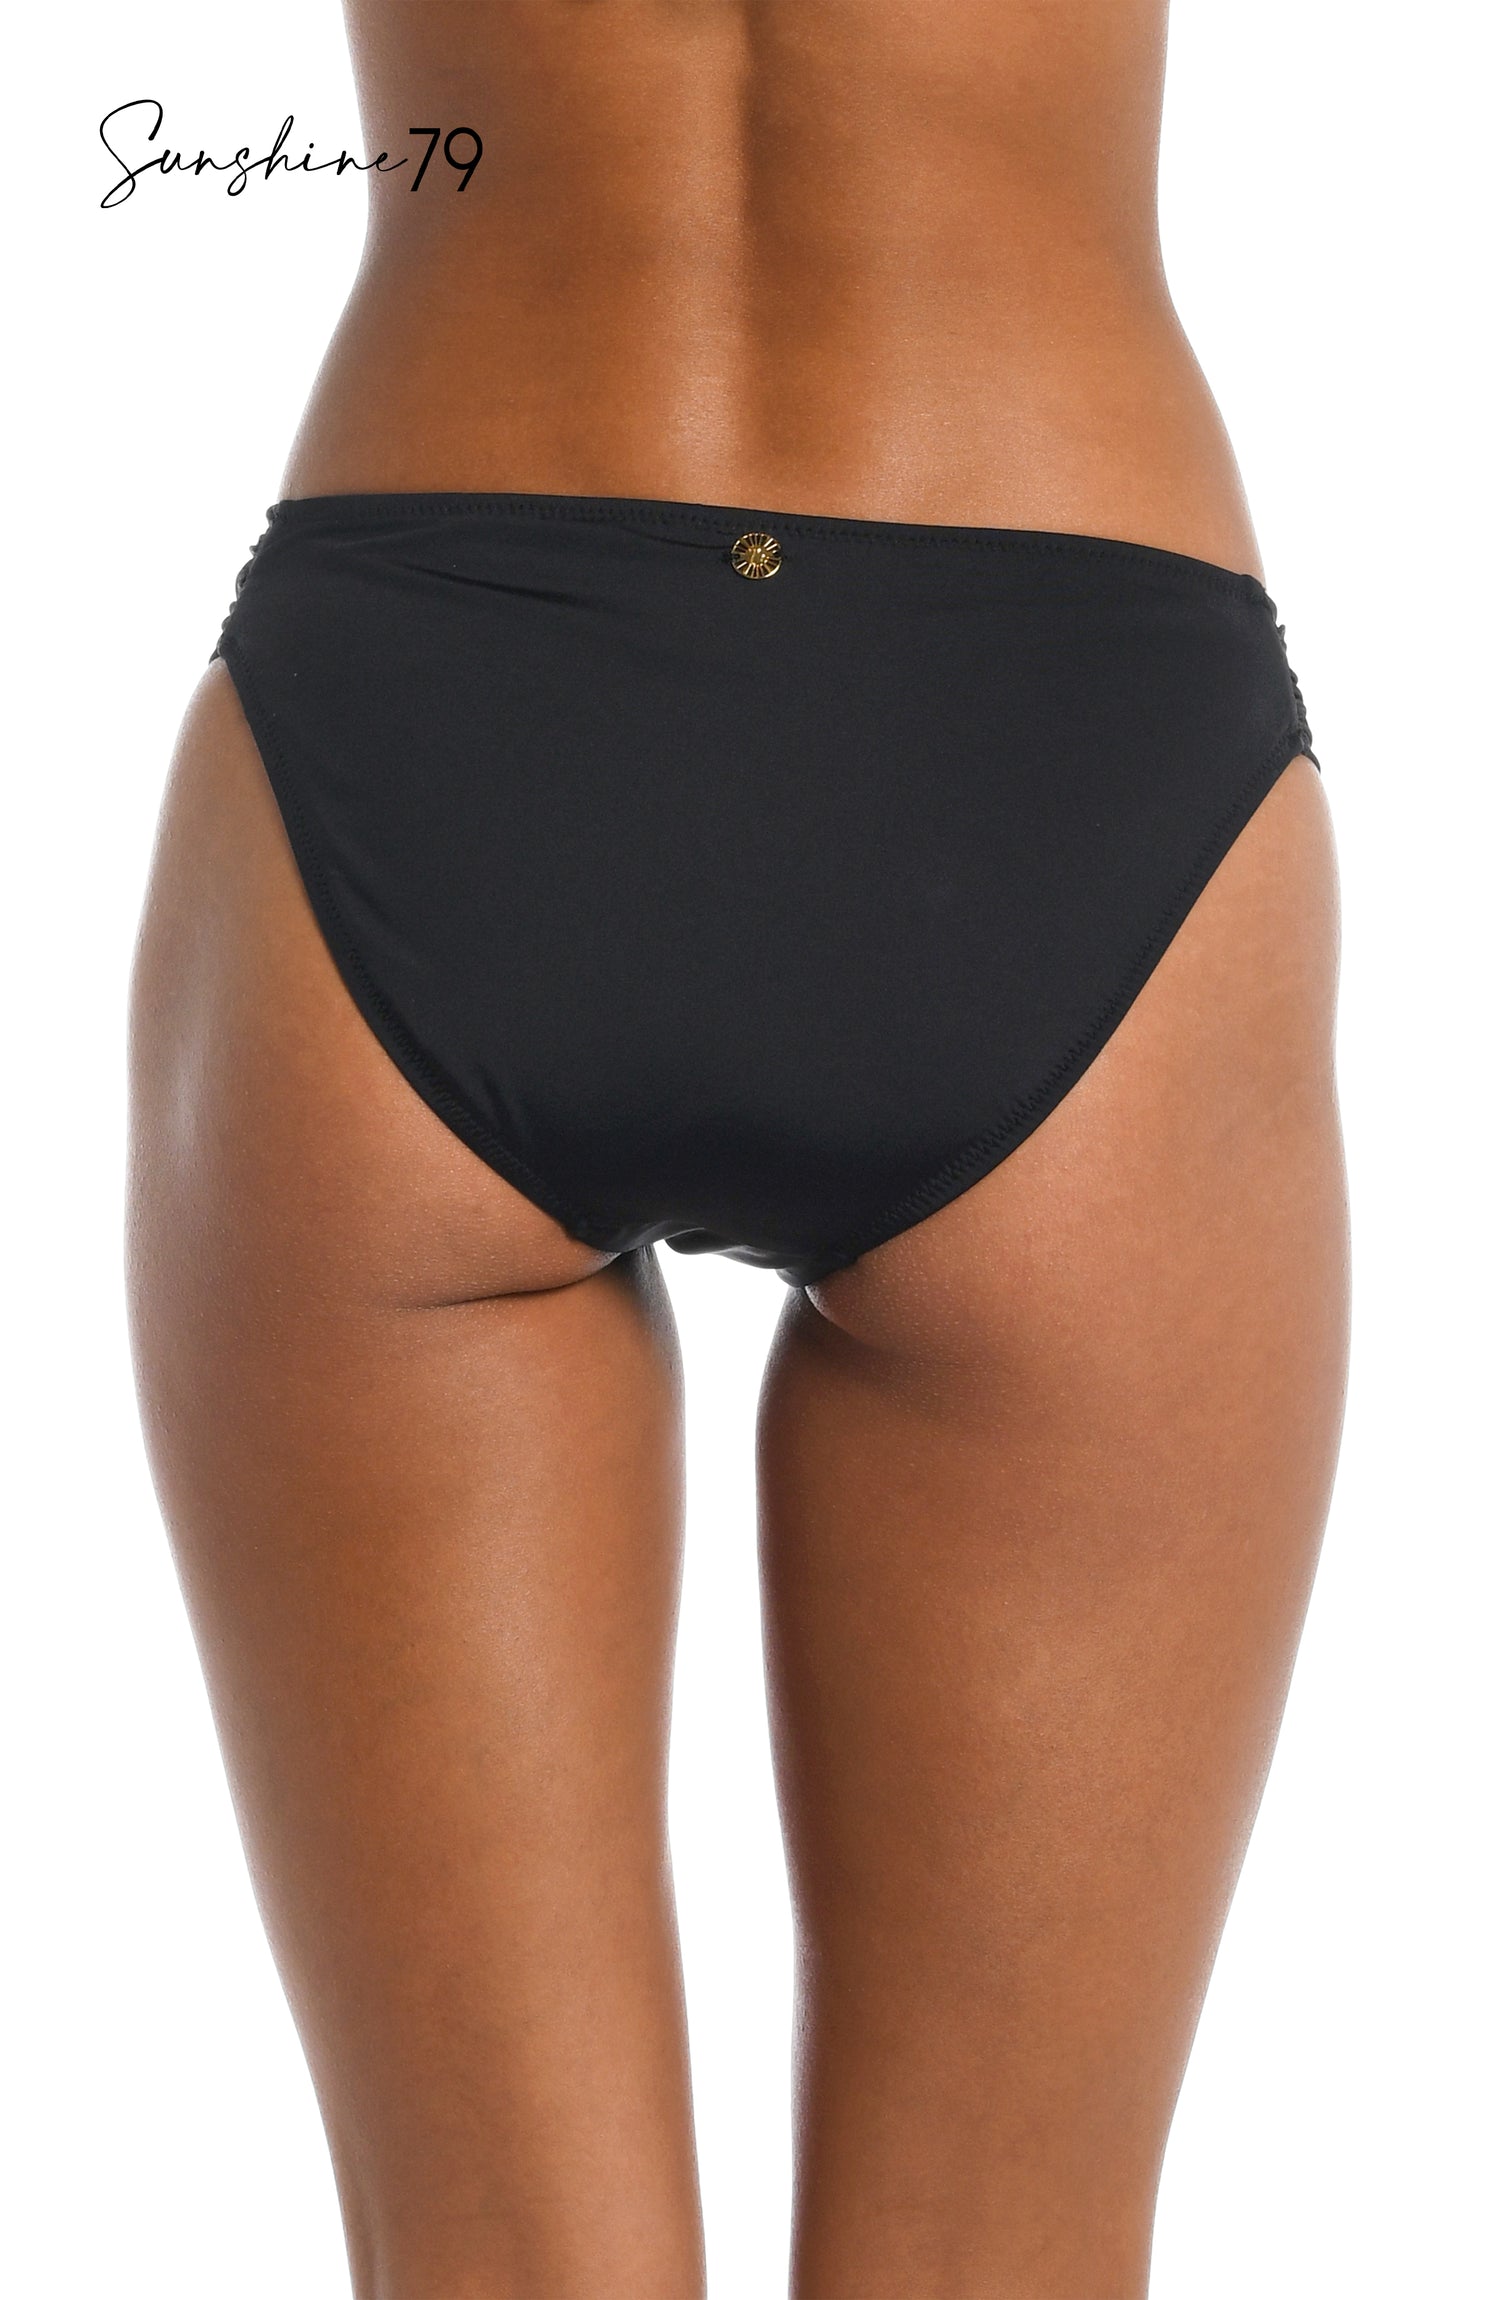 Model is wearing a solid black side shirred hipster bottom from our Sunshine 79 brand.